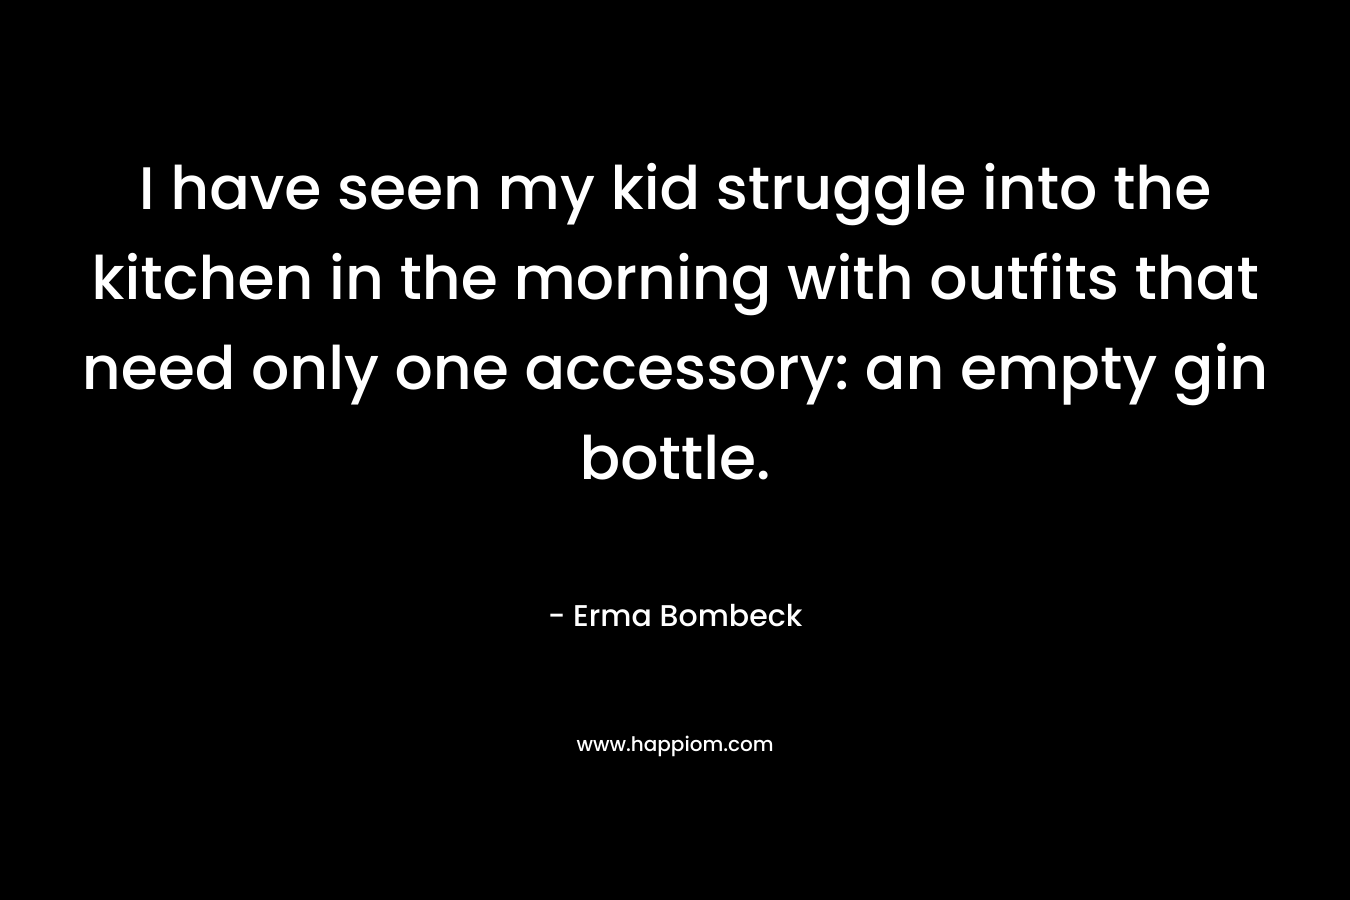 I have seen my kid struggle into the kitchen in the morning with outfits that need only one accessory: an empty gin bottle.